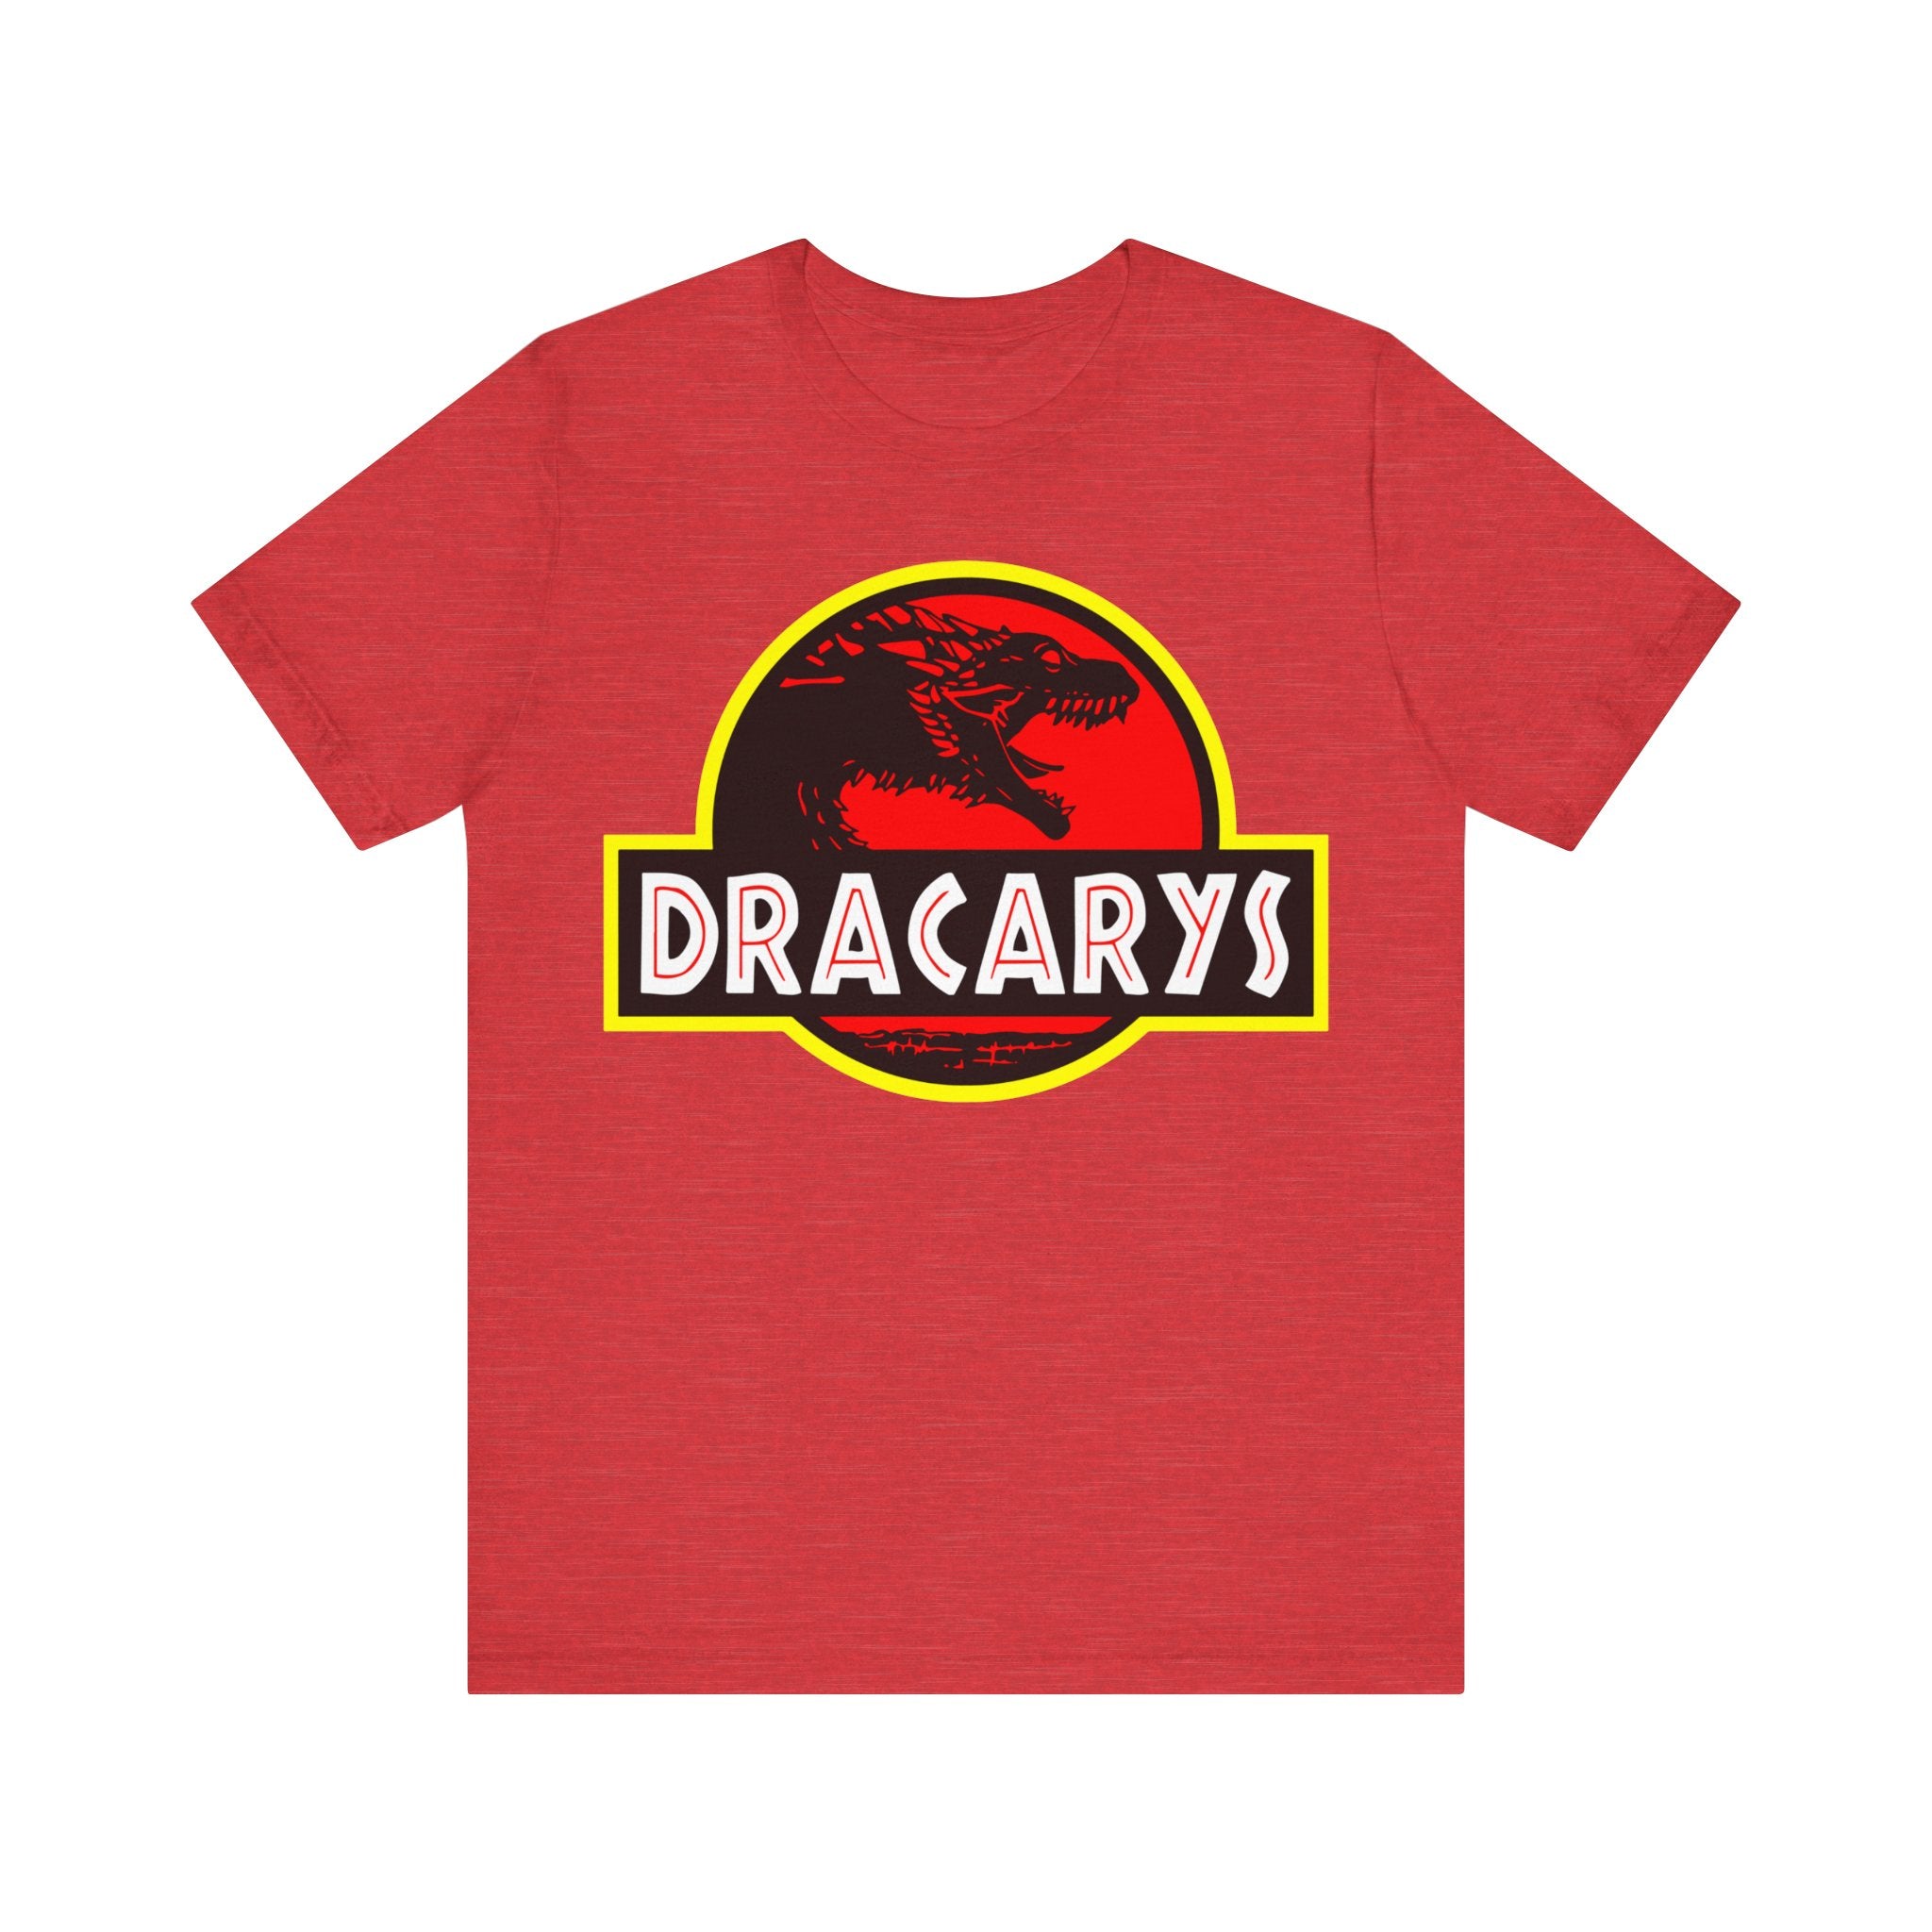 Dracarys T-Shirt featuring a quality print.